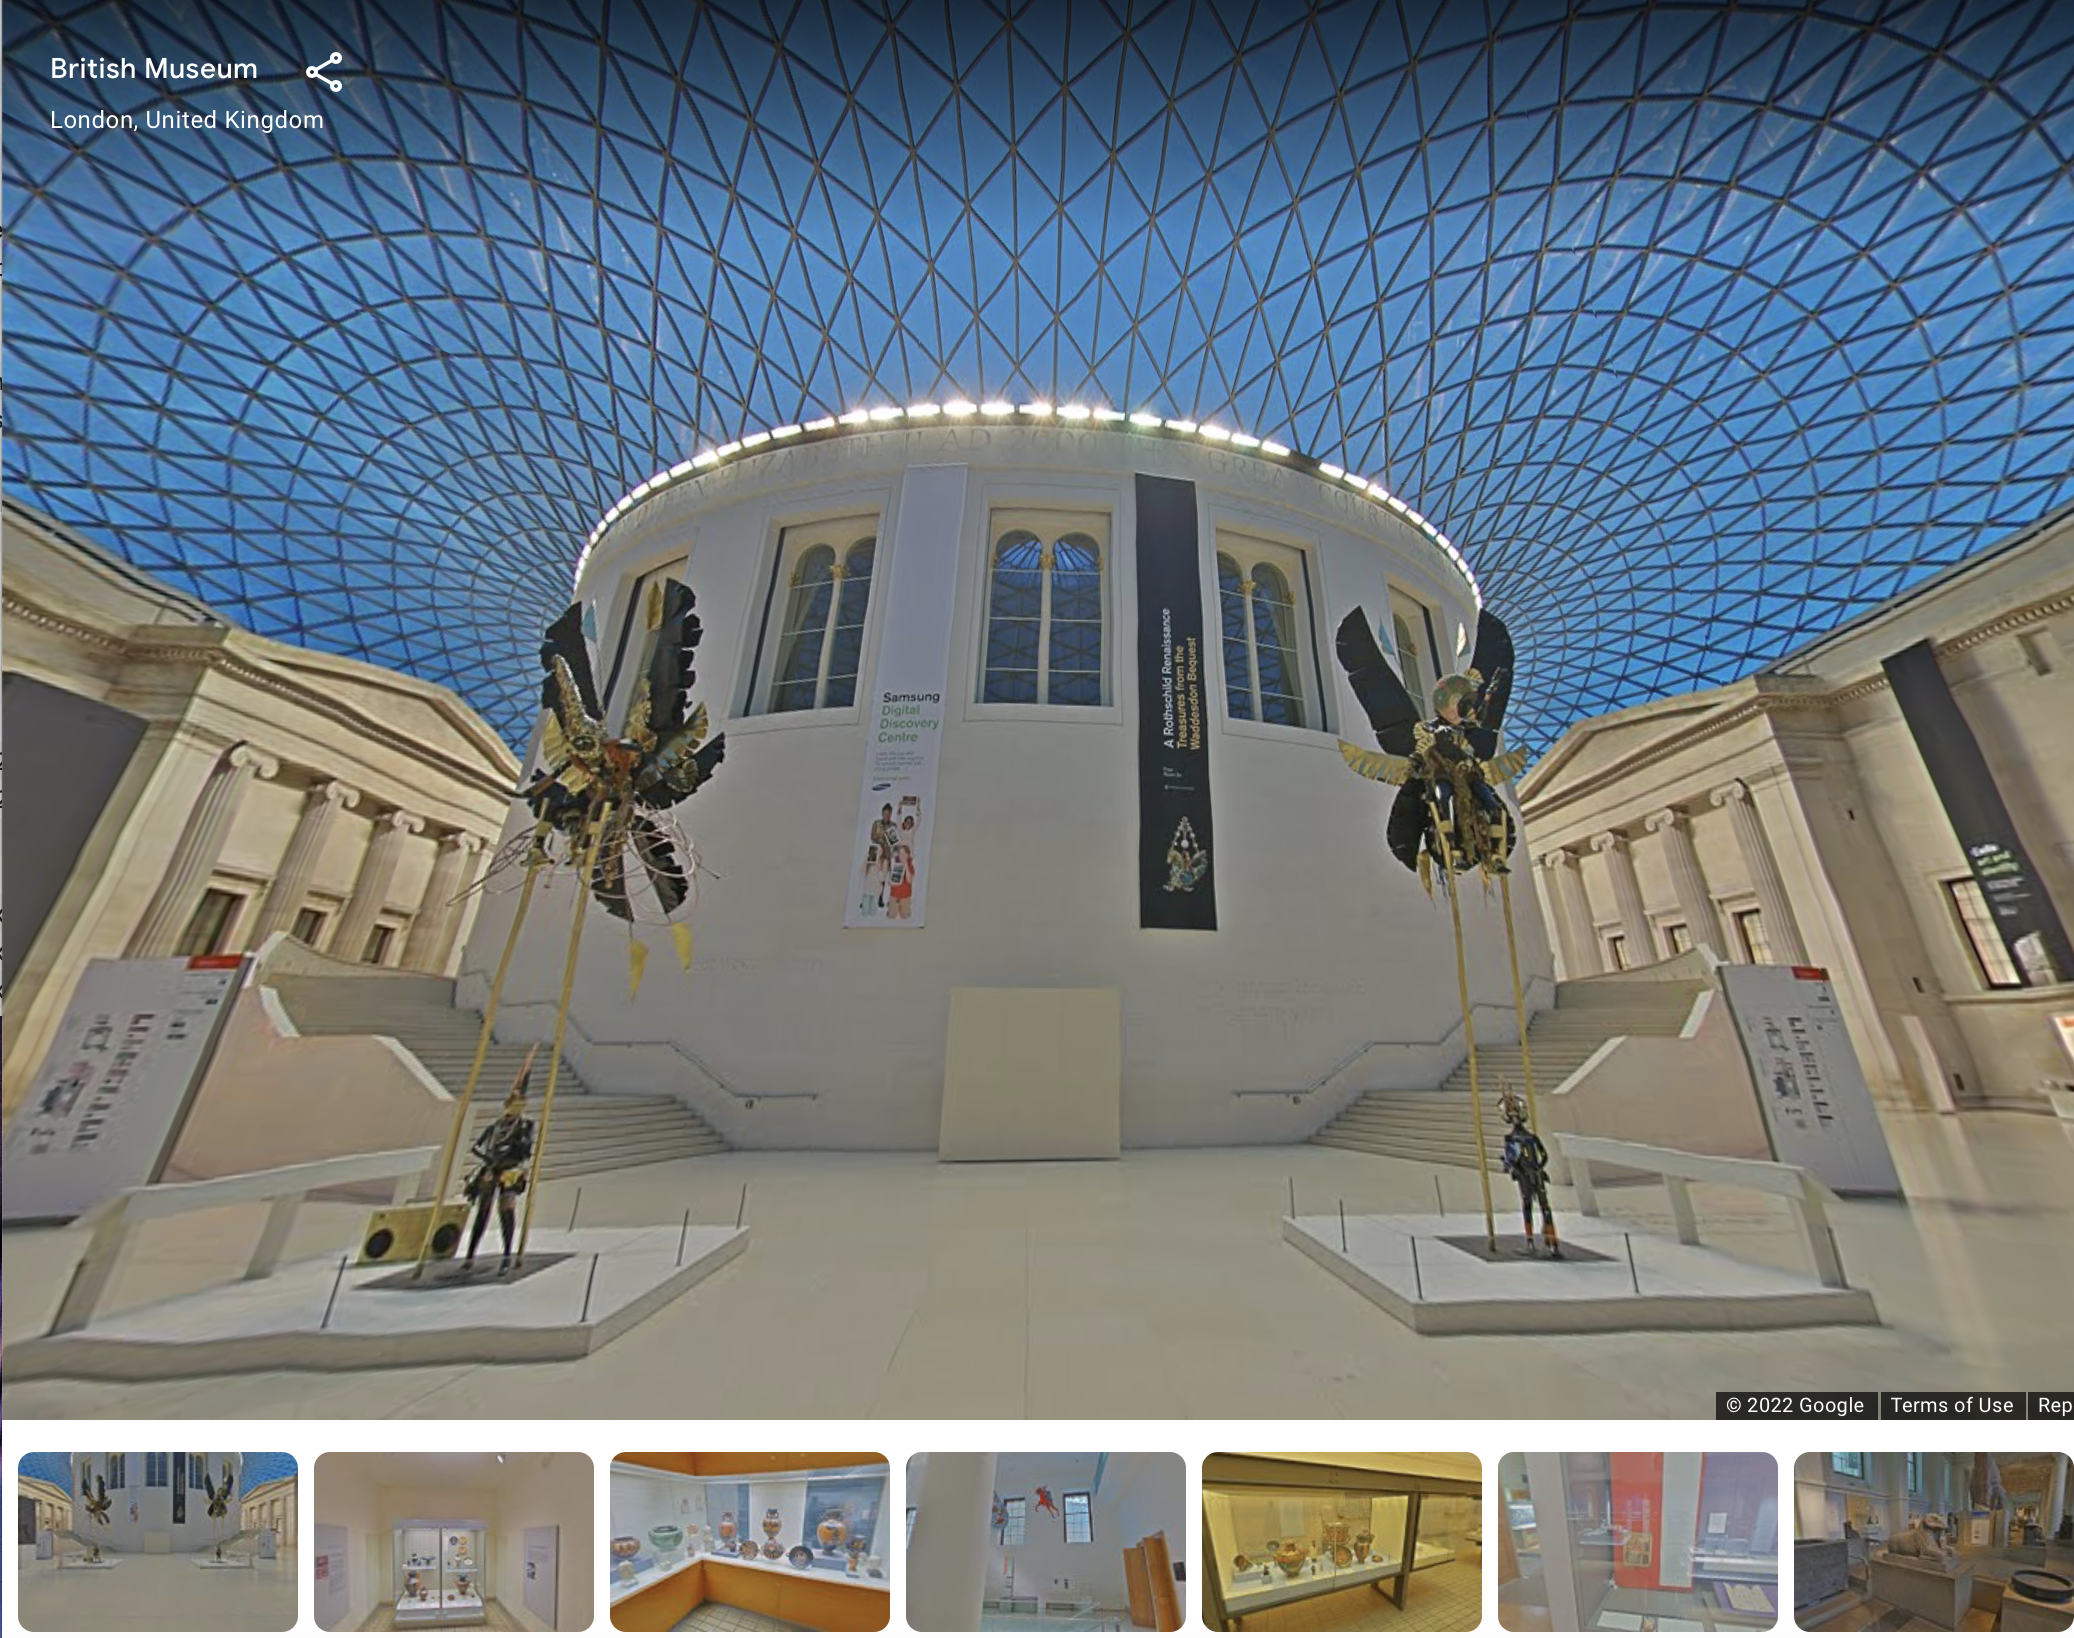 Images of virtual exhibition